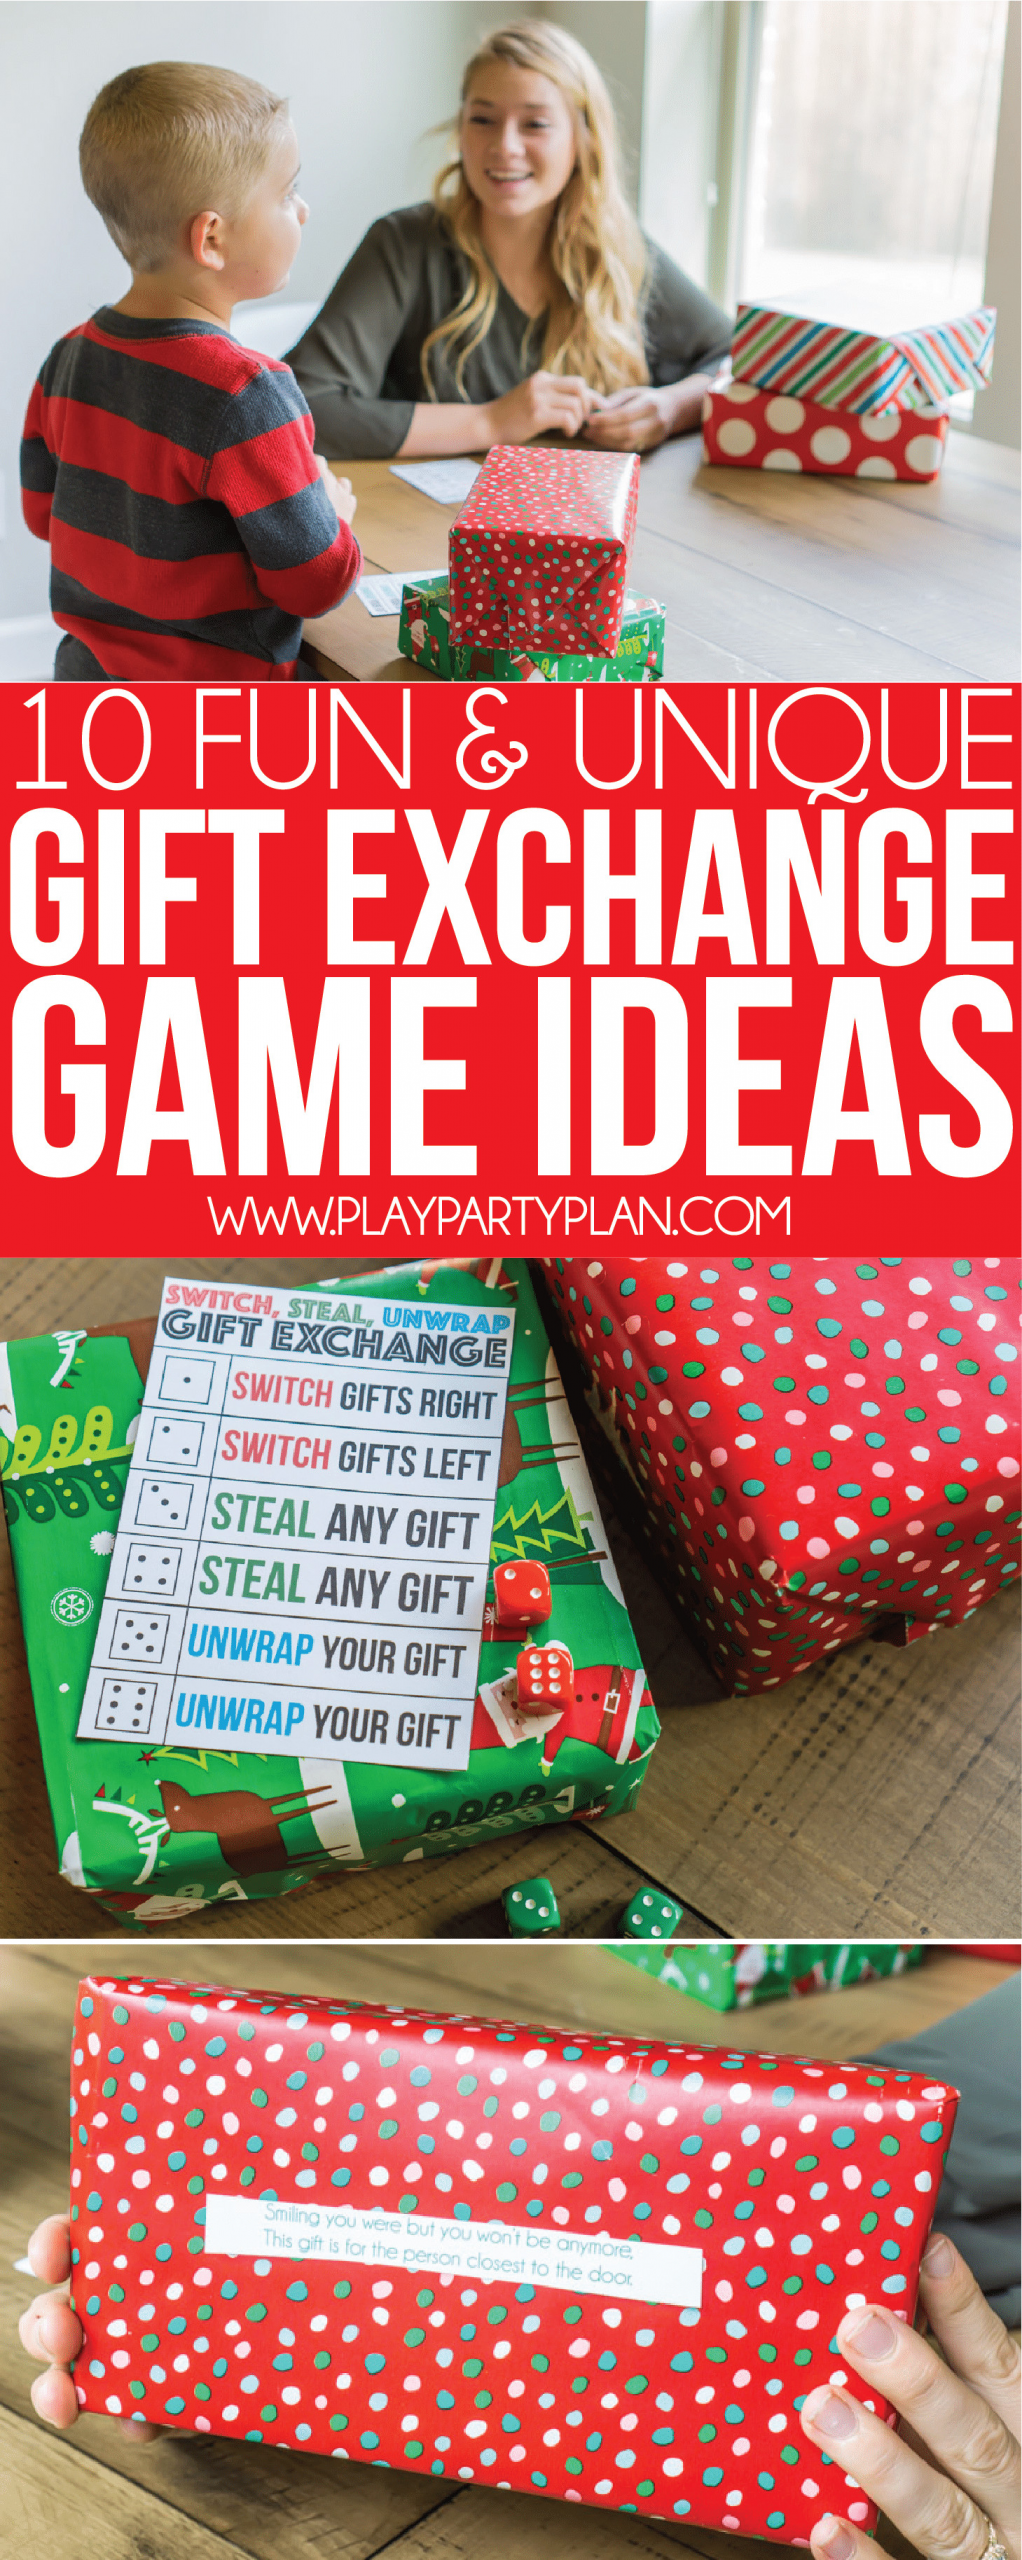 Christmas Party Exchange Ideas
 12 Best Christmas Gift Exchange Games Play Party Plan